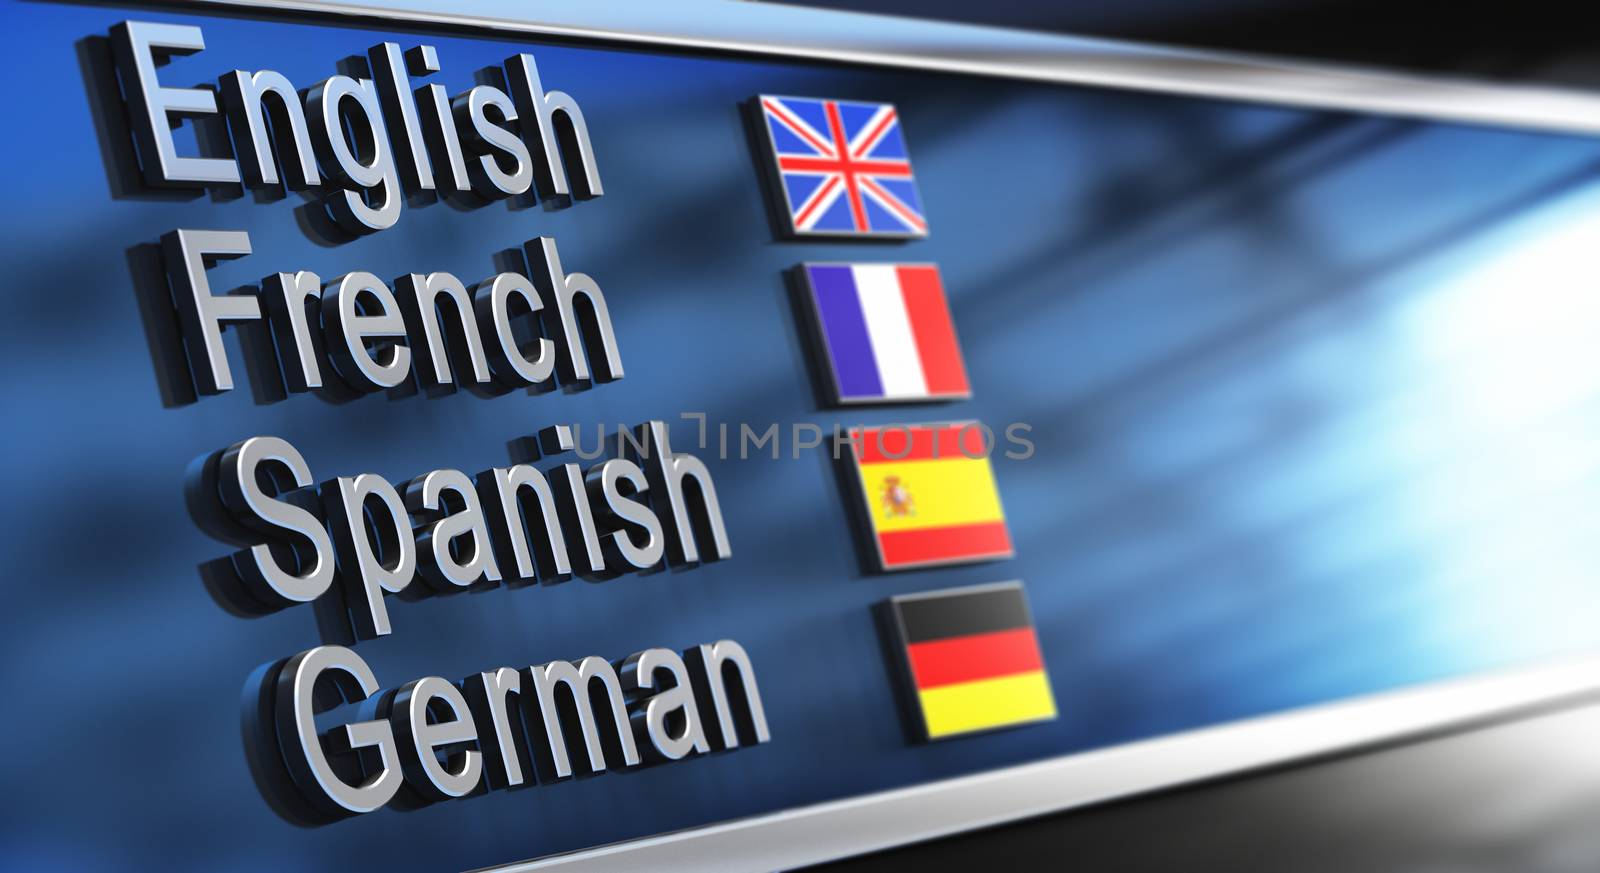 English, French, Spanish and German written on a building facade. Image for illustation of language school